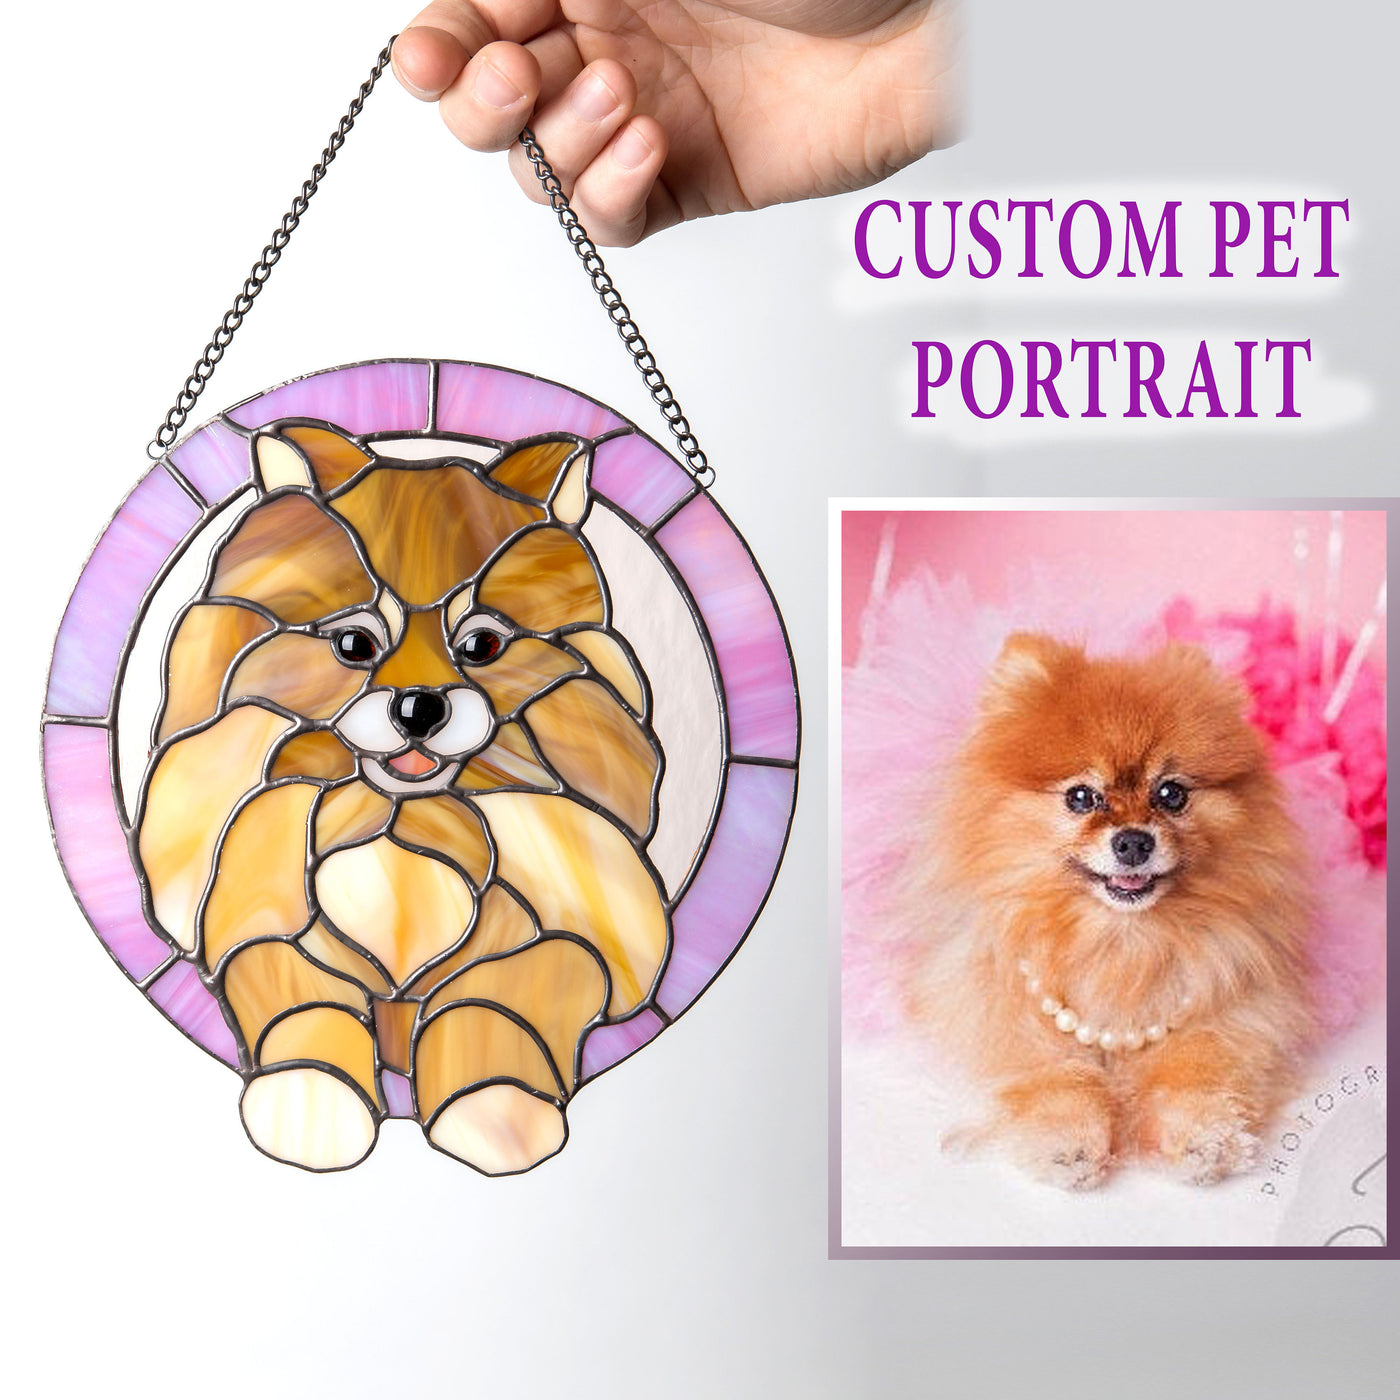 Stained glass pet portrait of a dog made from photo round panel